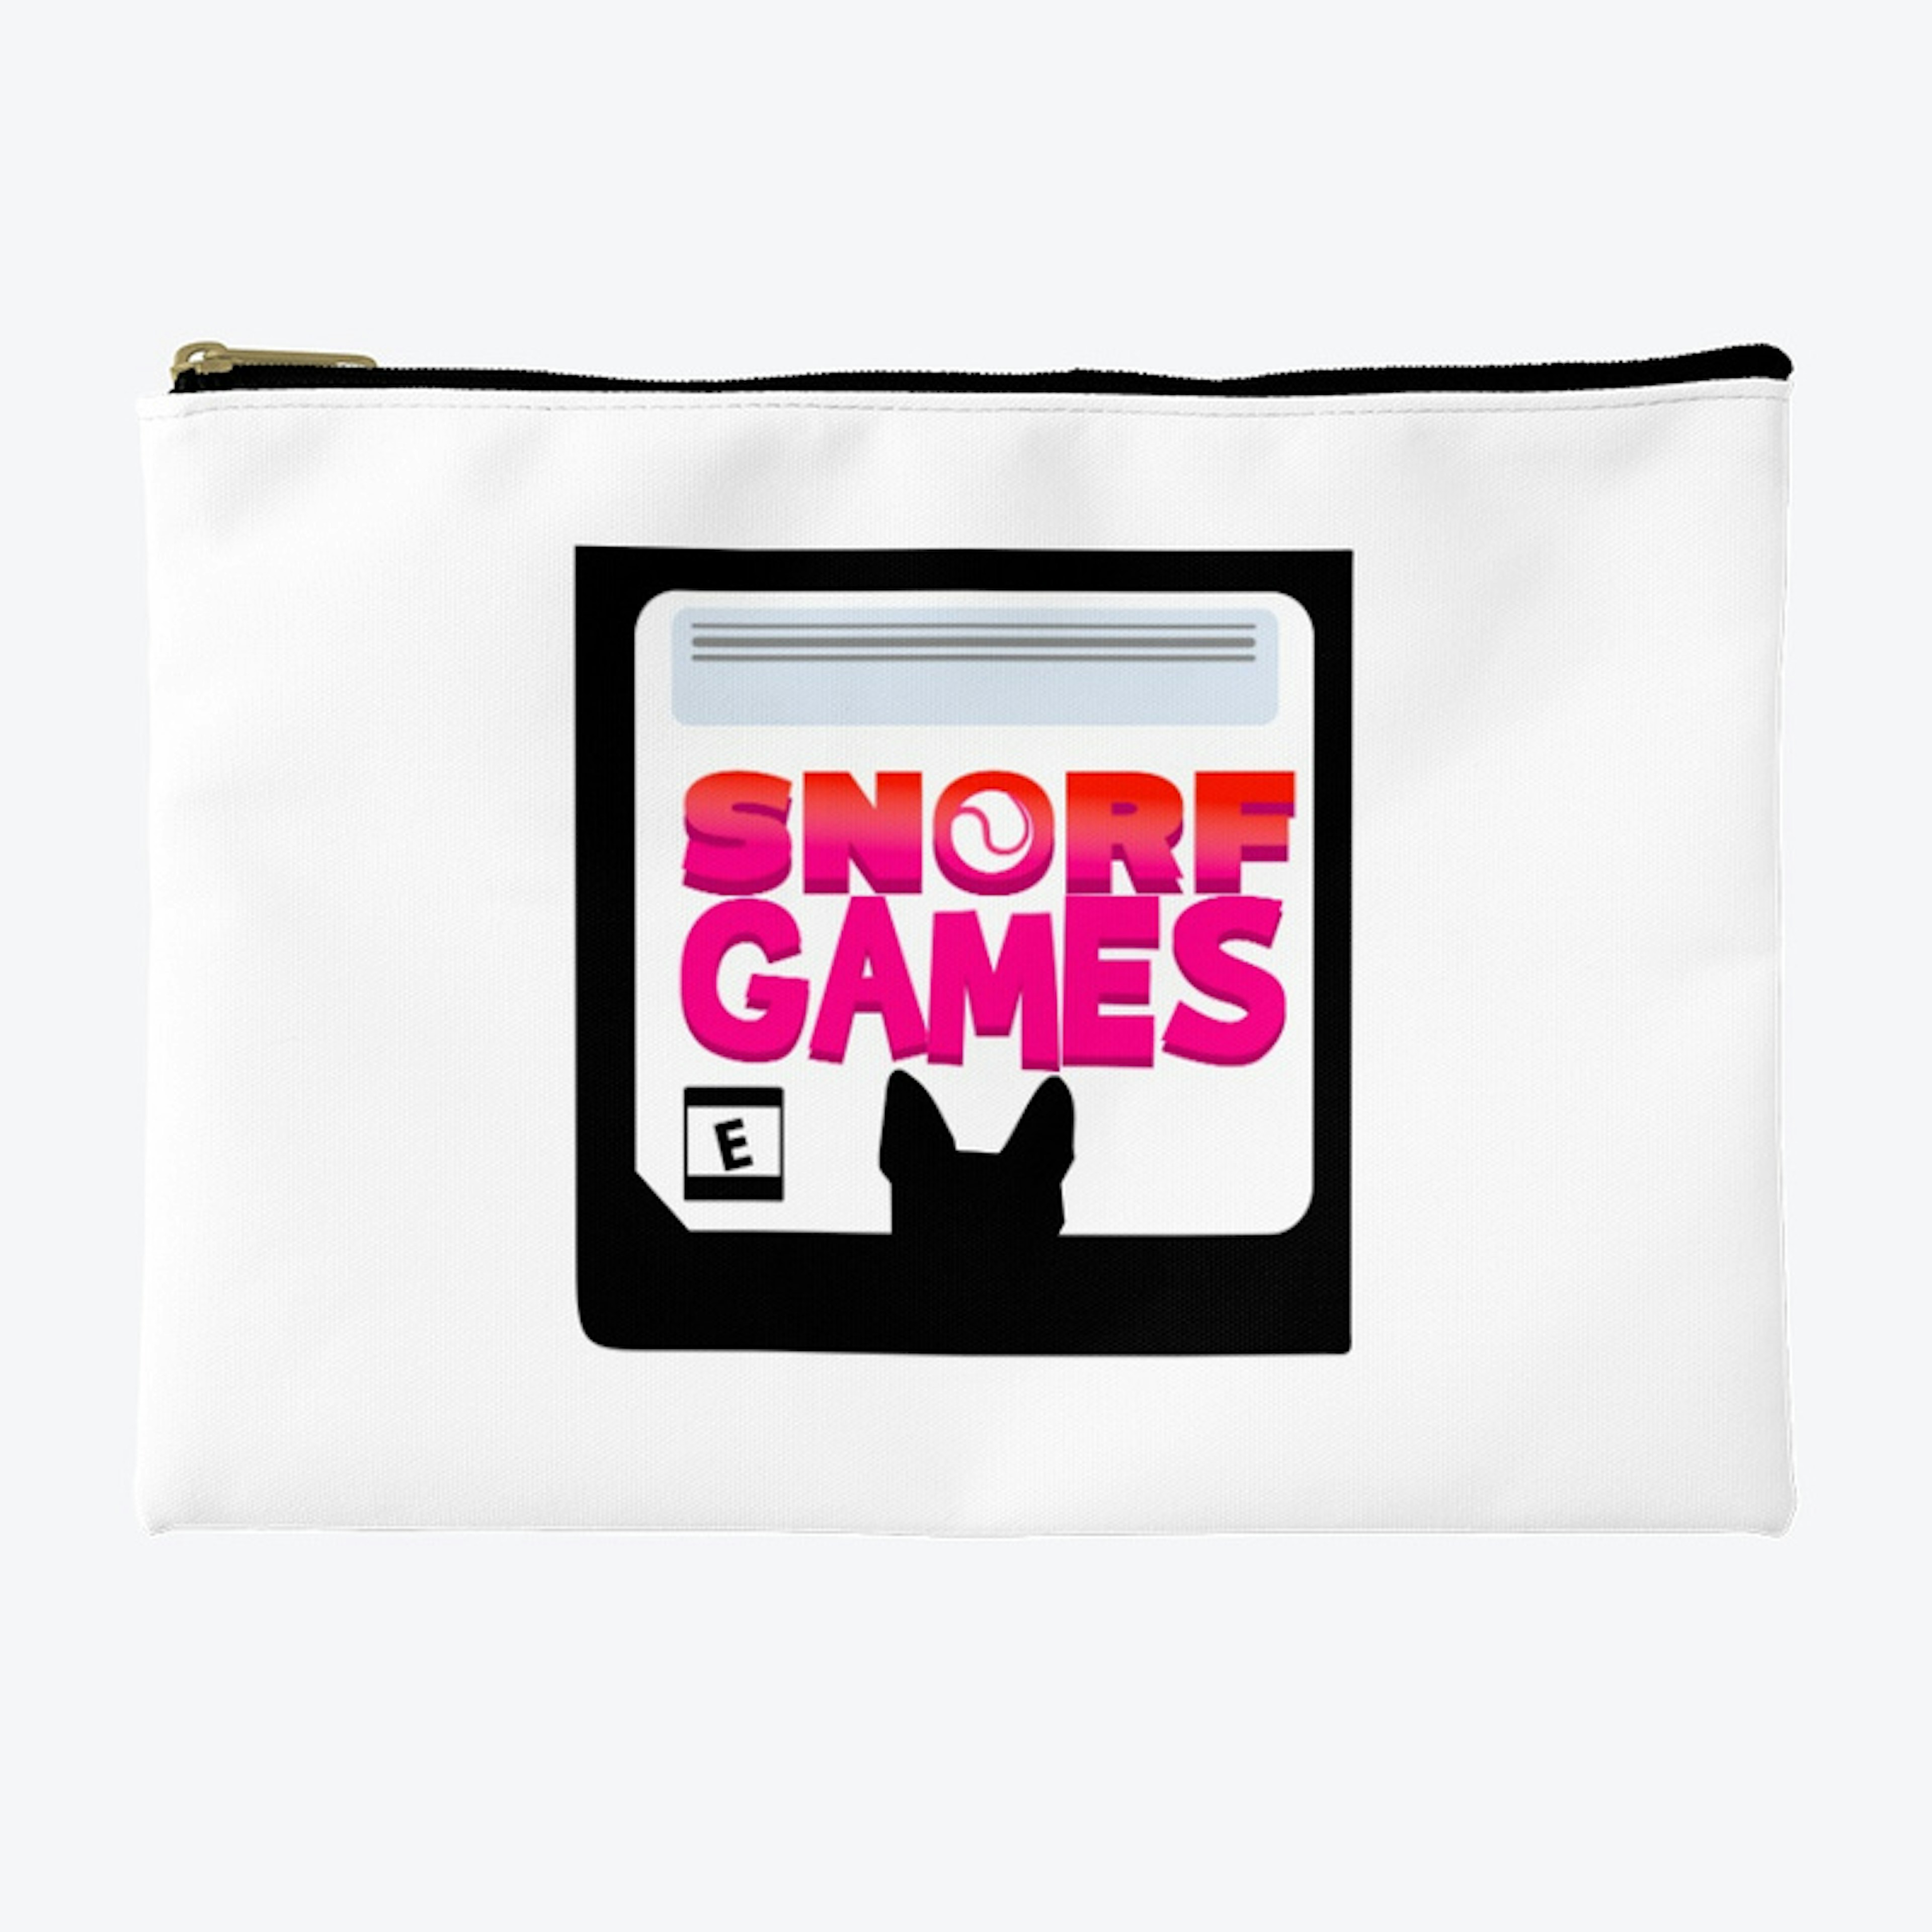 Snorf Games